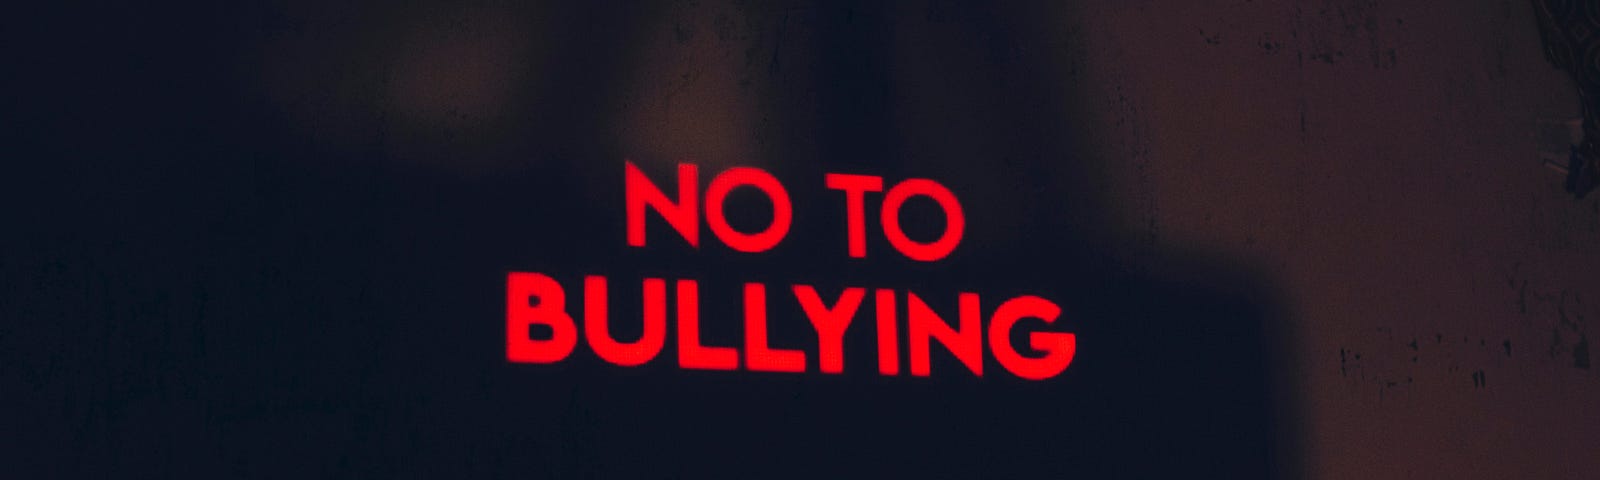 Image of a red light lit up that says “No to Bullying”.